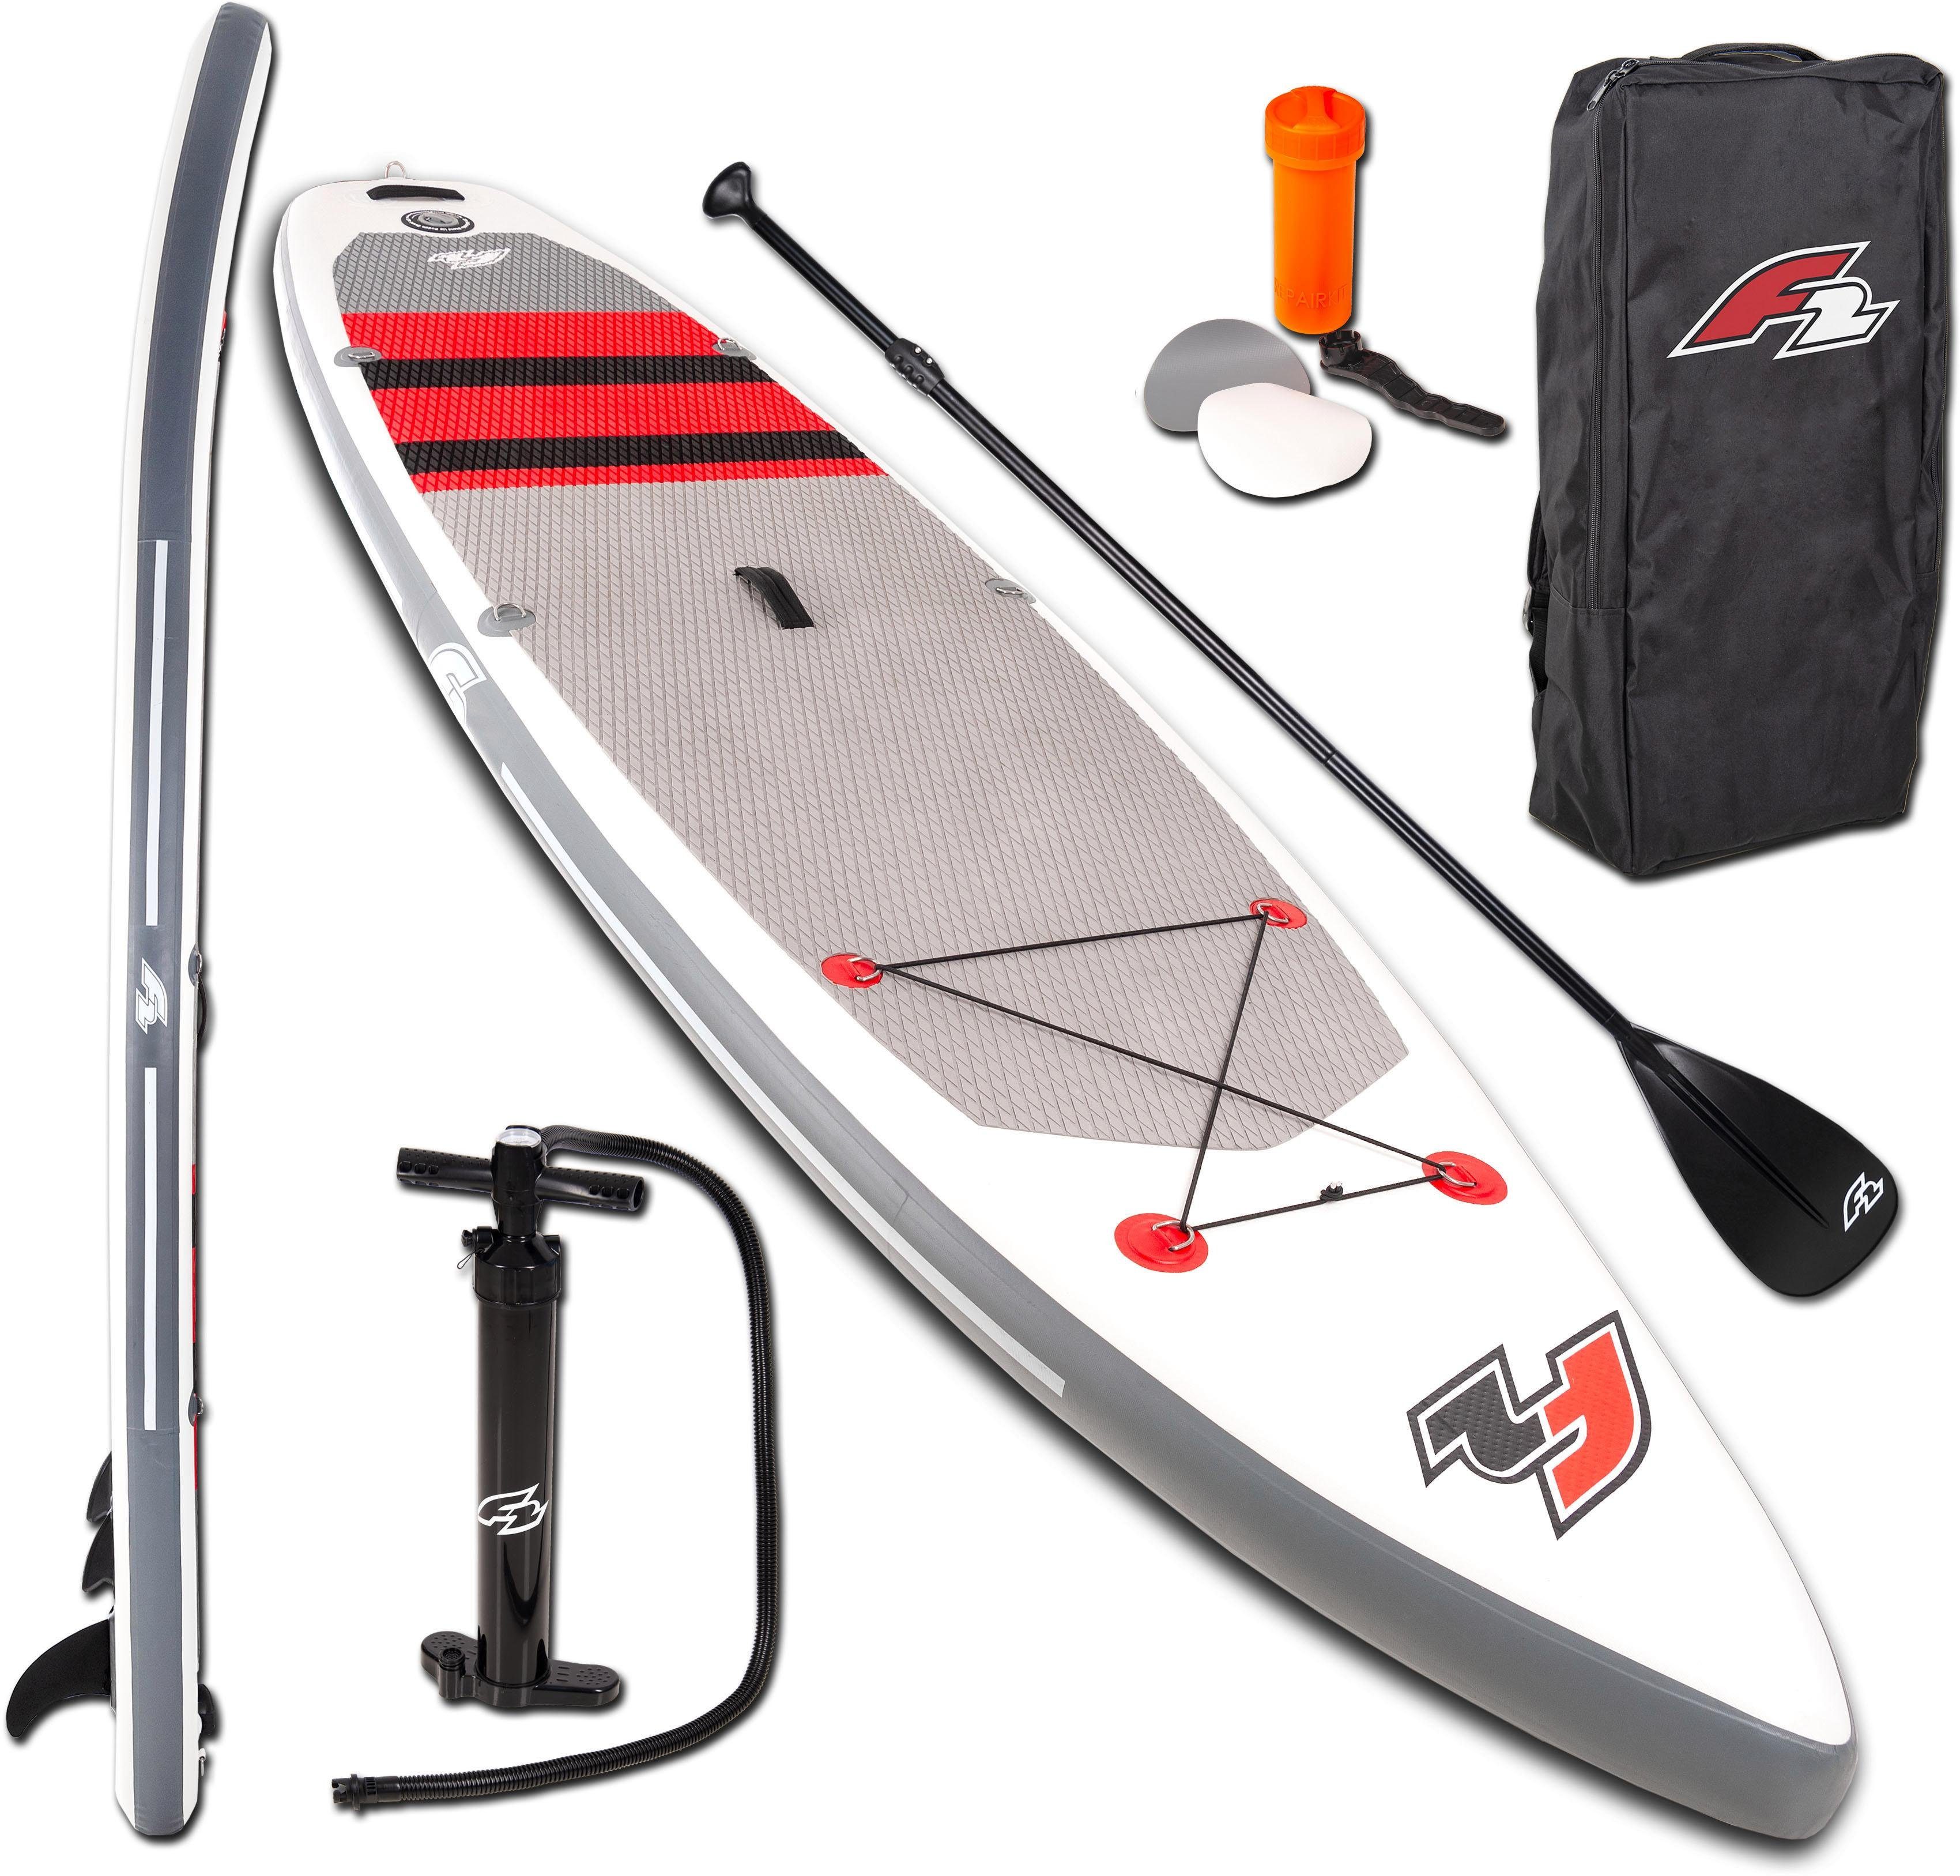 Up Stand (Set, 11,5, F2 Paddling SUP-Board Inflatable 5 Union tlg),